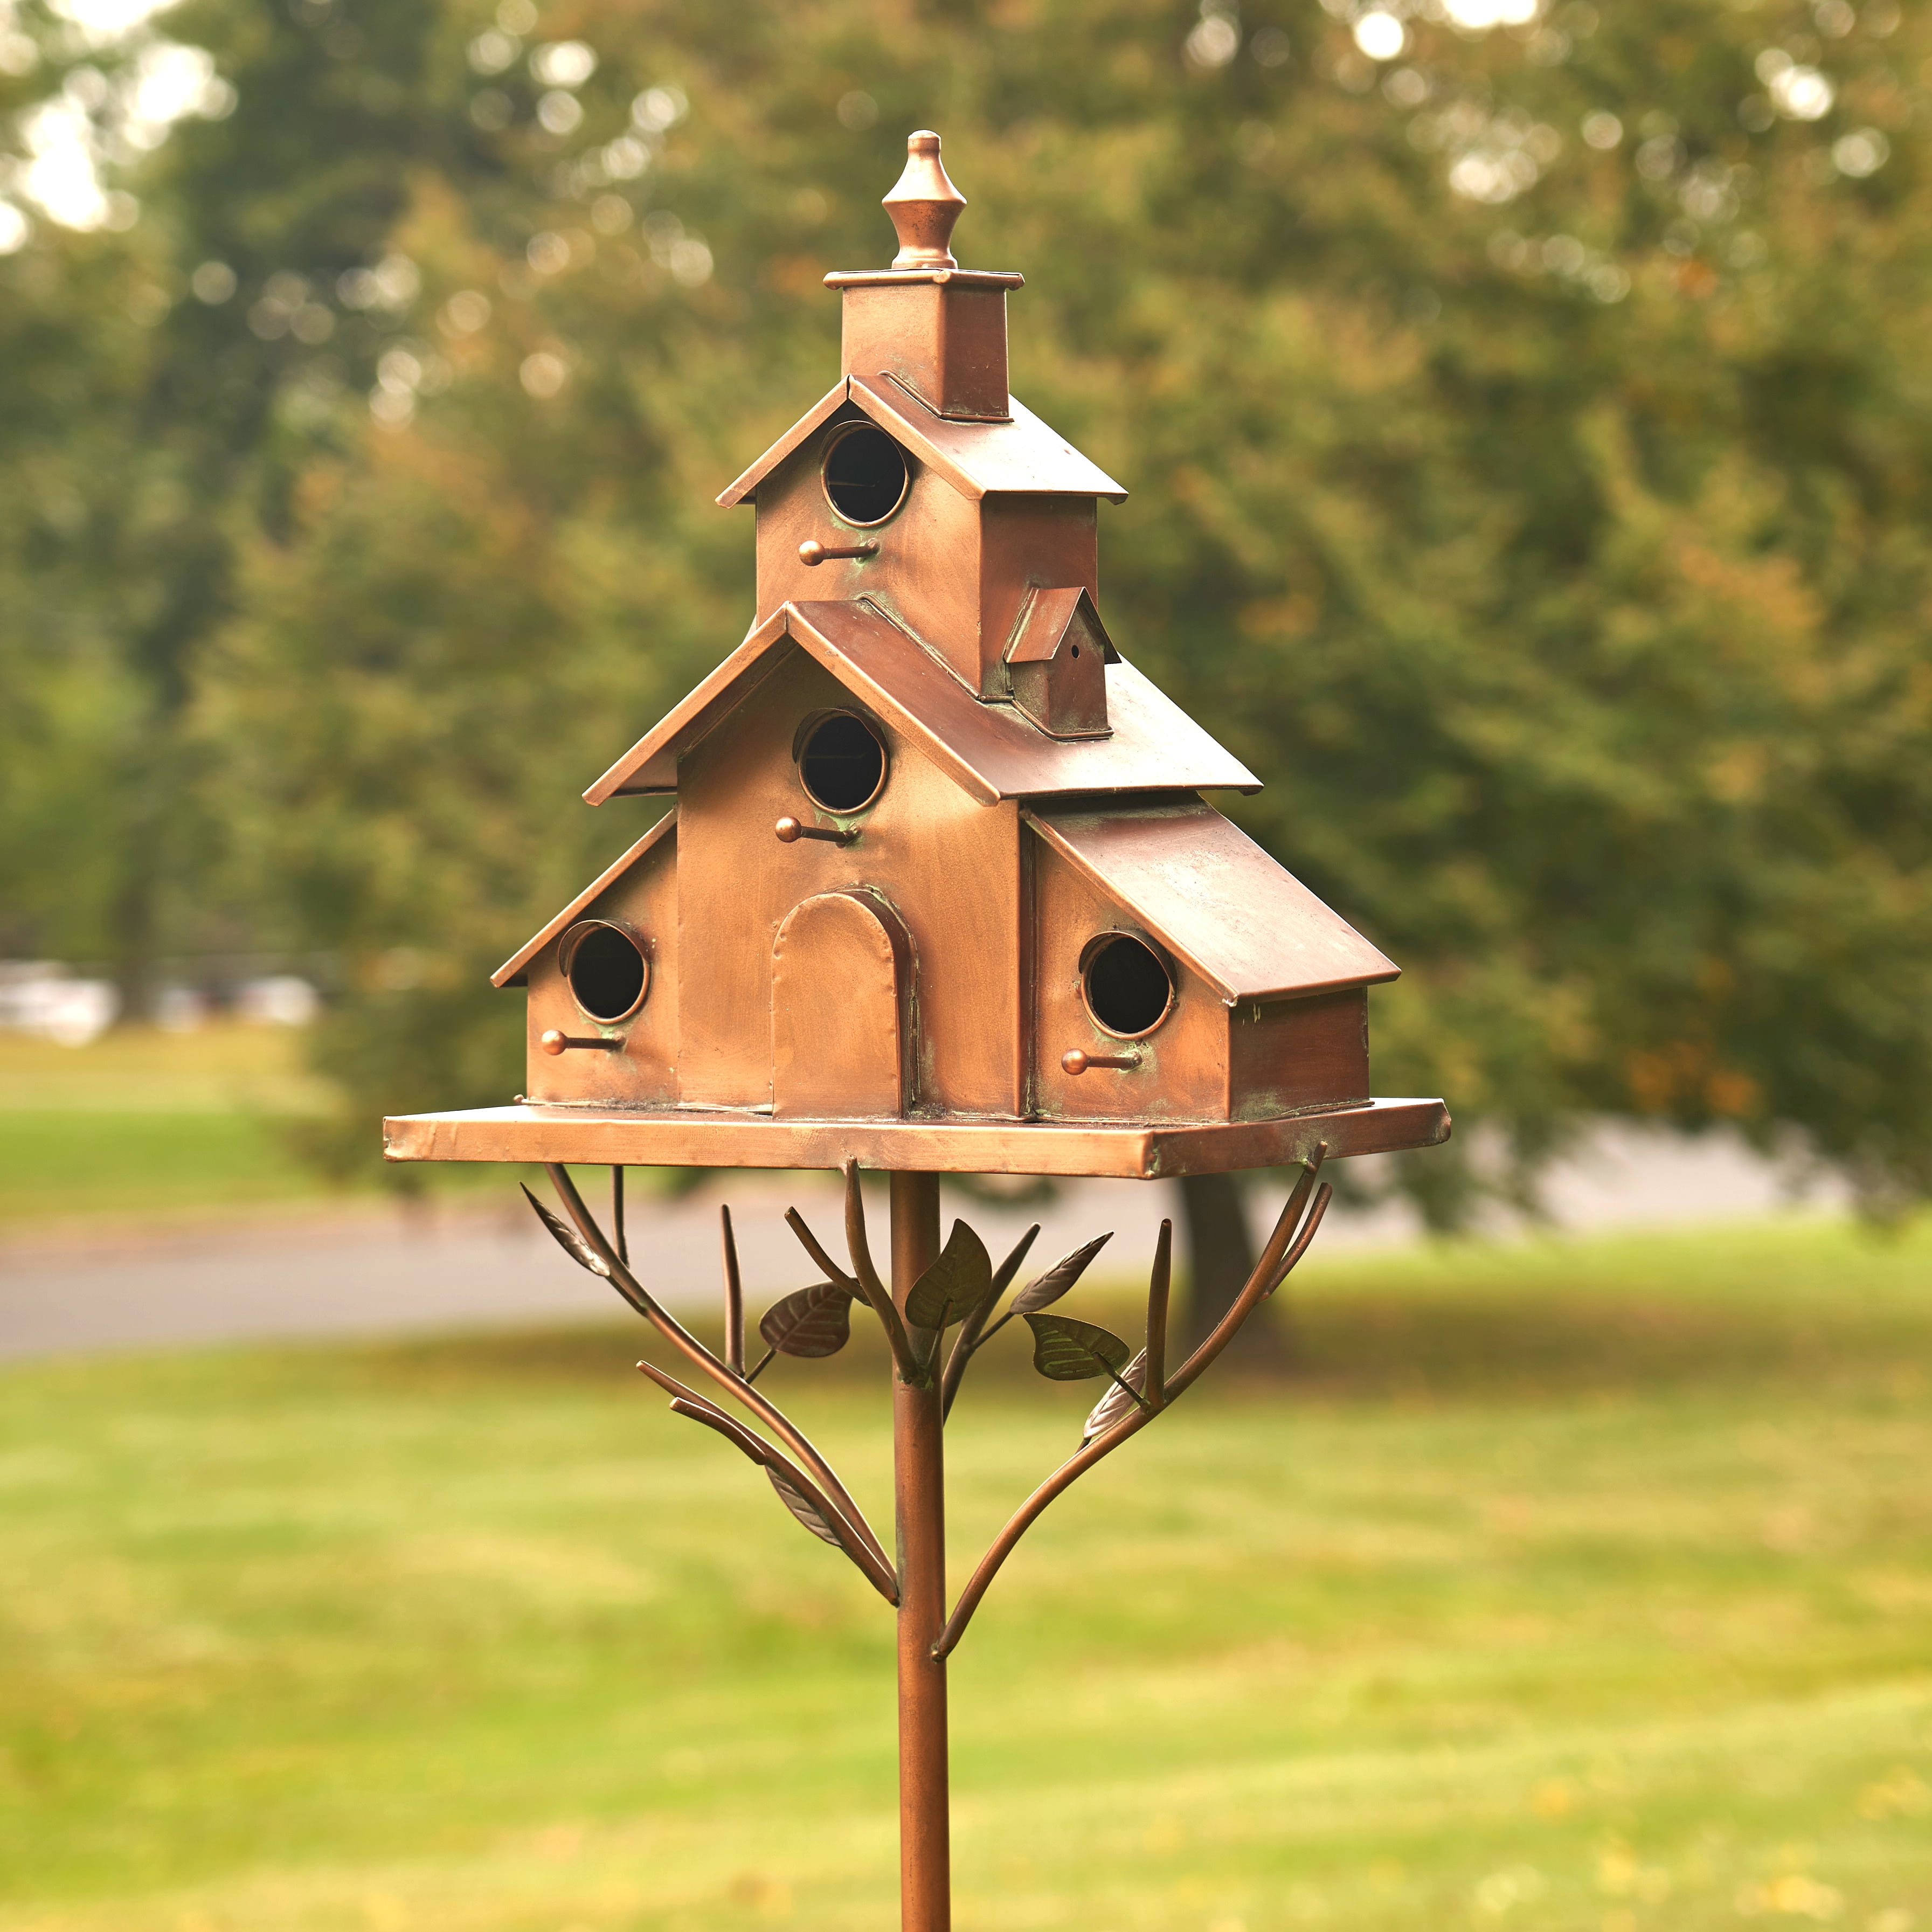 Large Copper Colored Multi-Birdhouse Stakes Room for 4 Bird Families in Each 